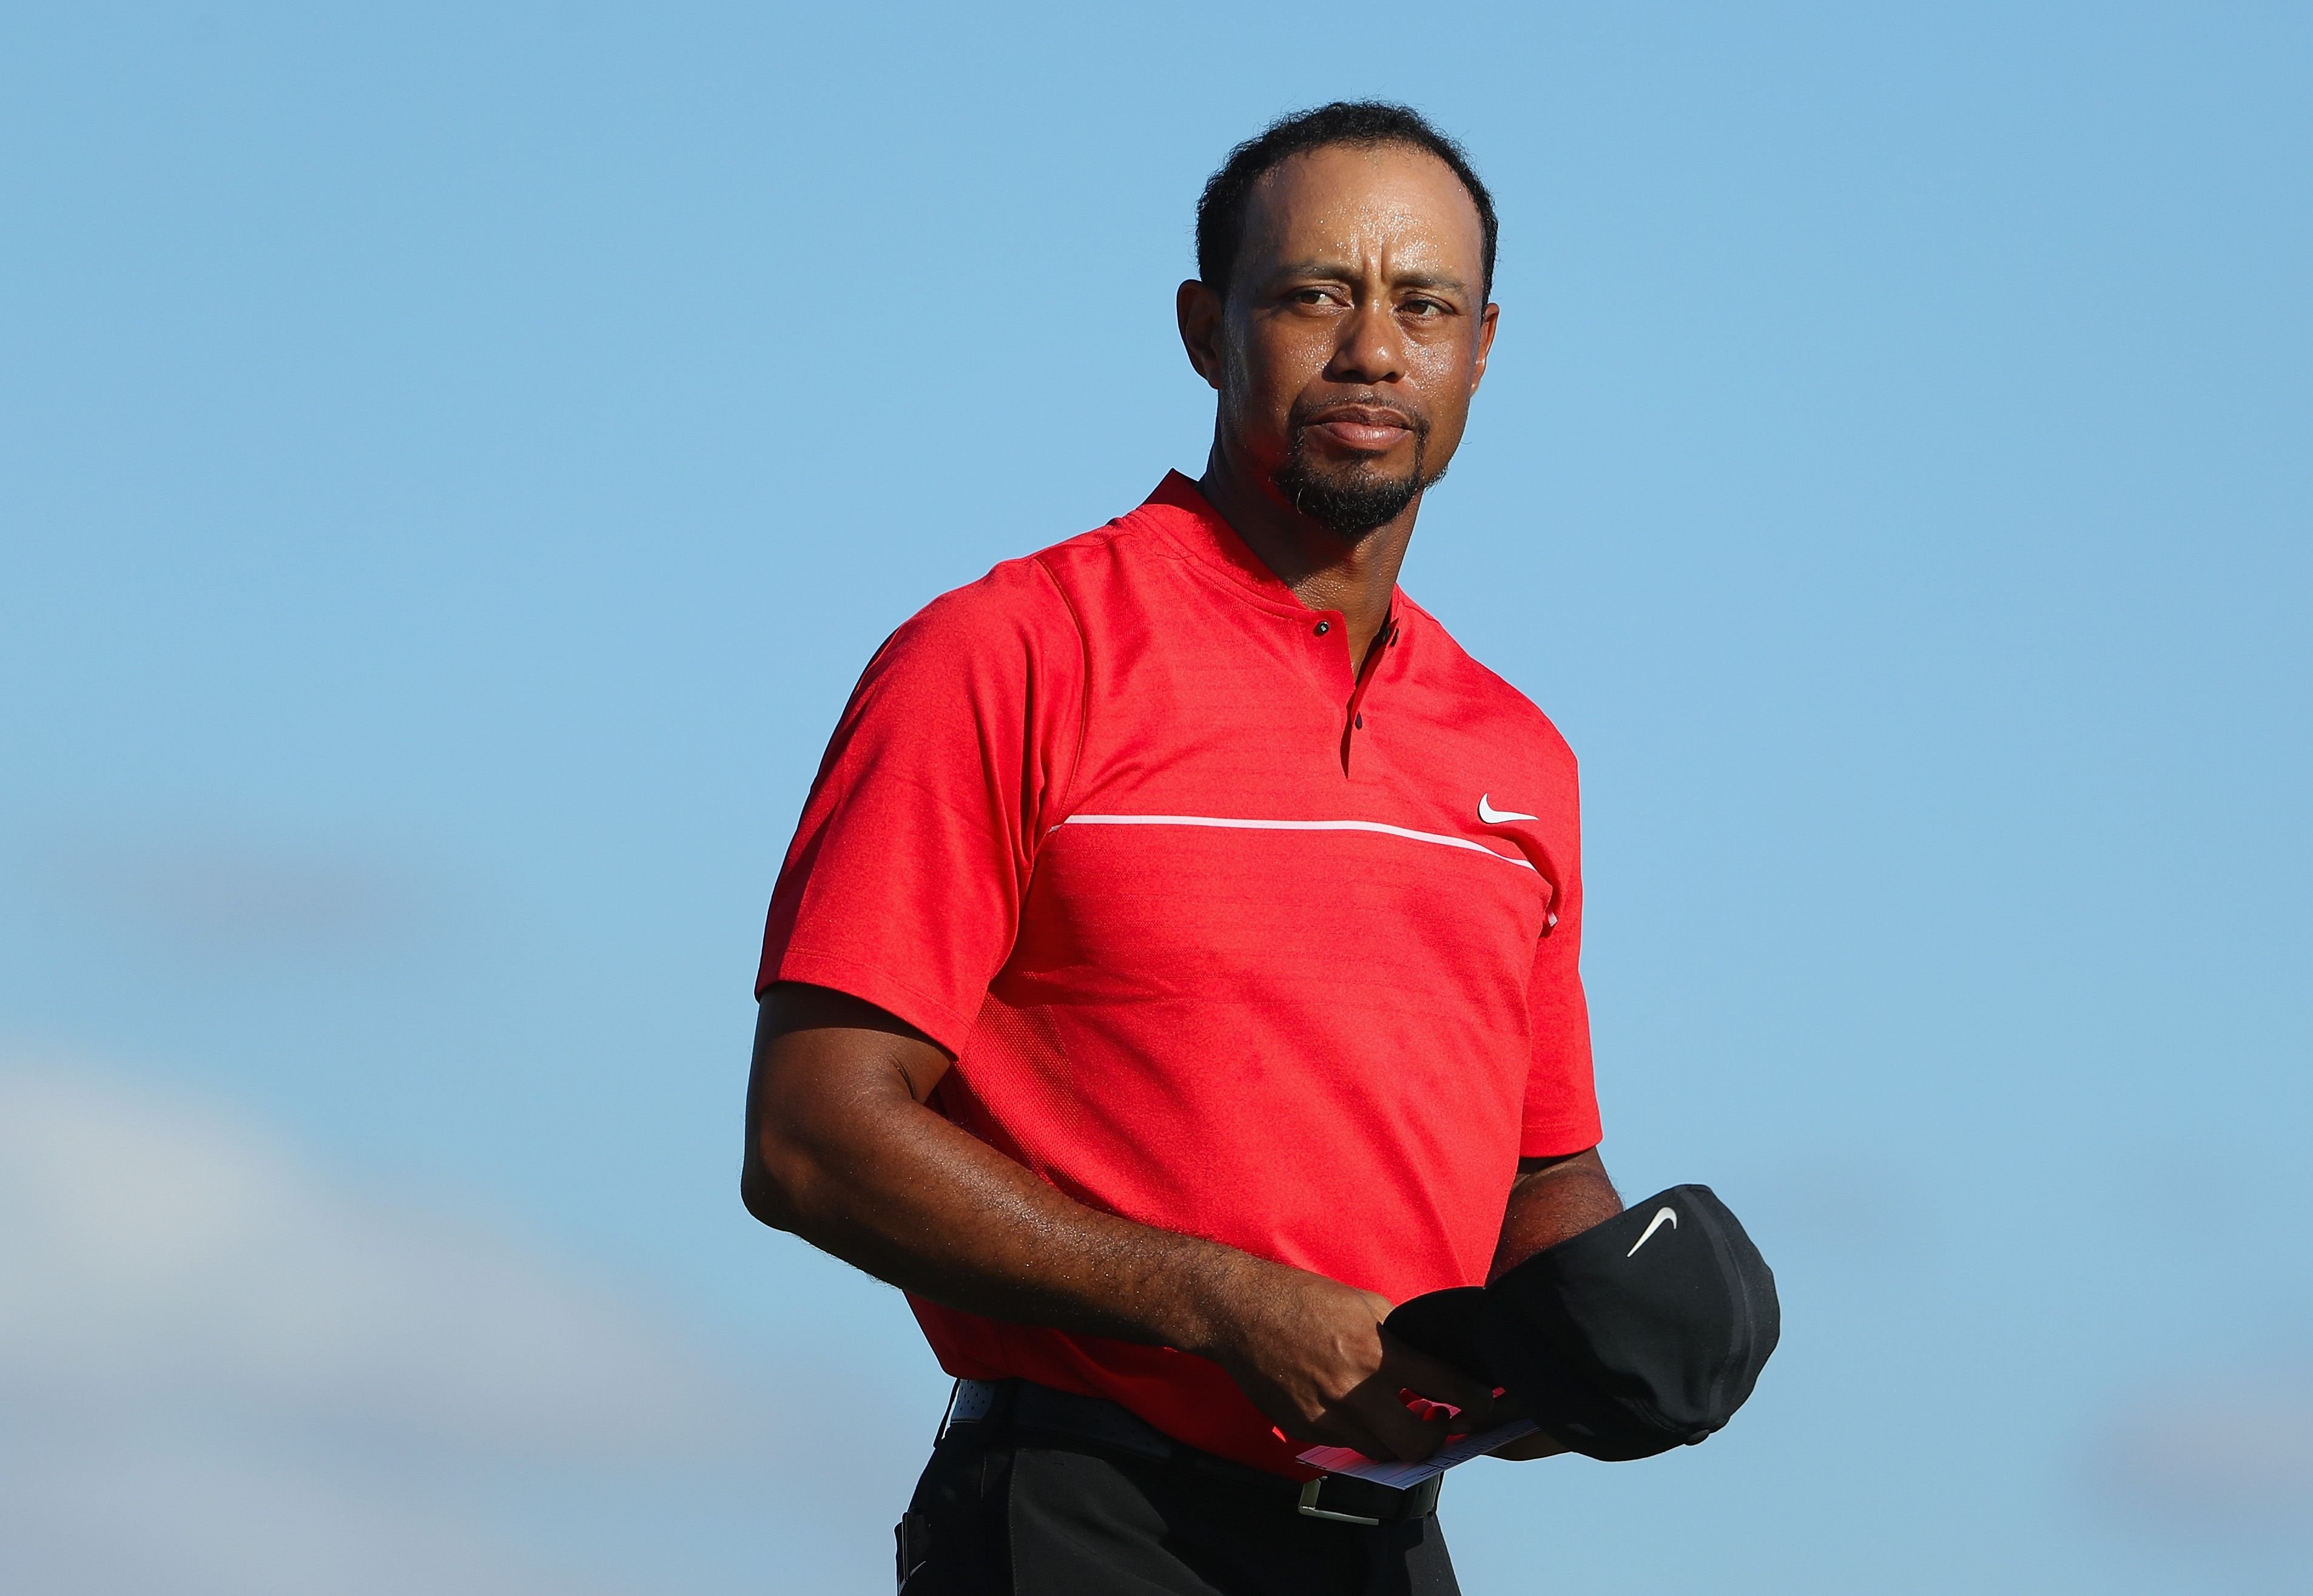 Tiger Woods during the 18th hole during the final round of the Hero World Challenge on December 4, 2016, in Nassau, Bahamas. | Source: Getty Images